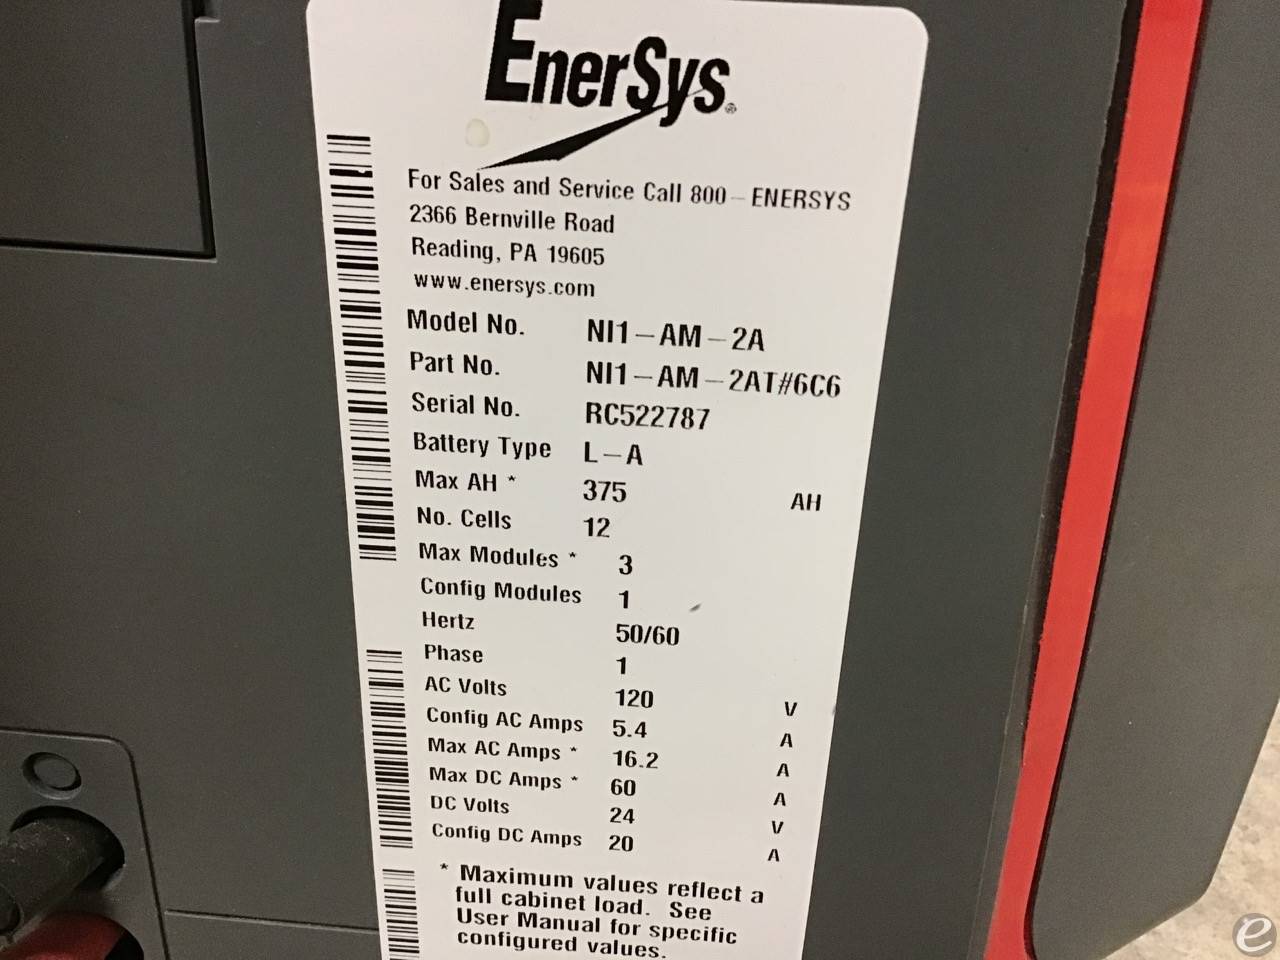 Enersys NI1-AM-2A